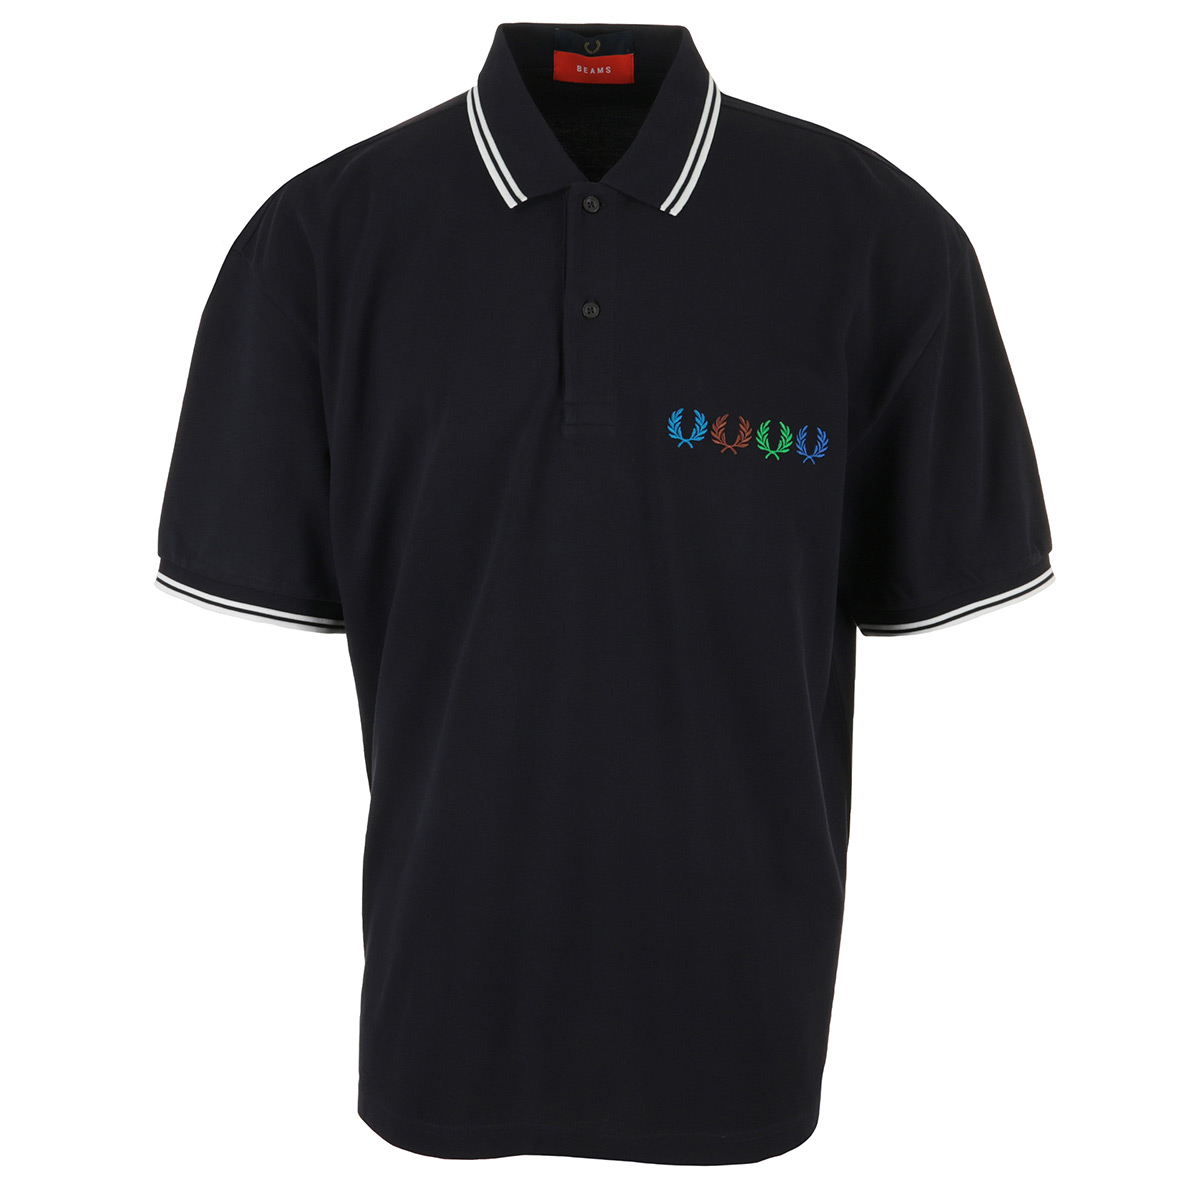 Fred Perry "Beams Twin Tipped Polo Shirt"